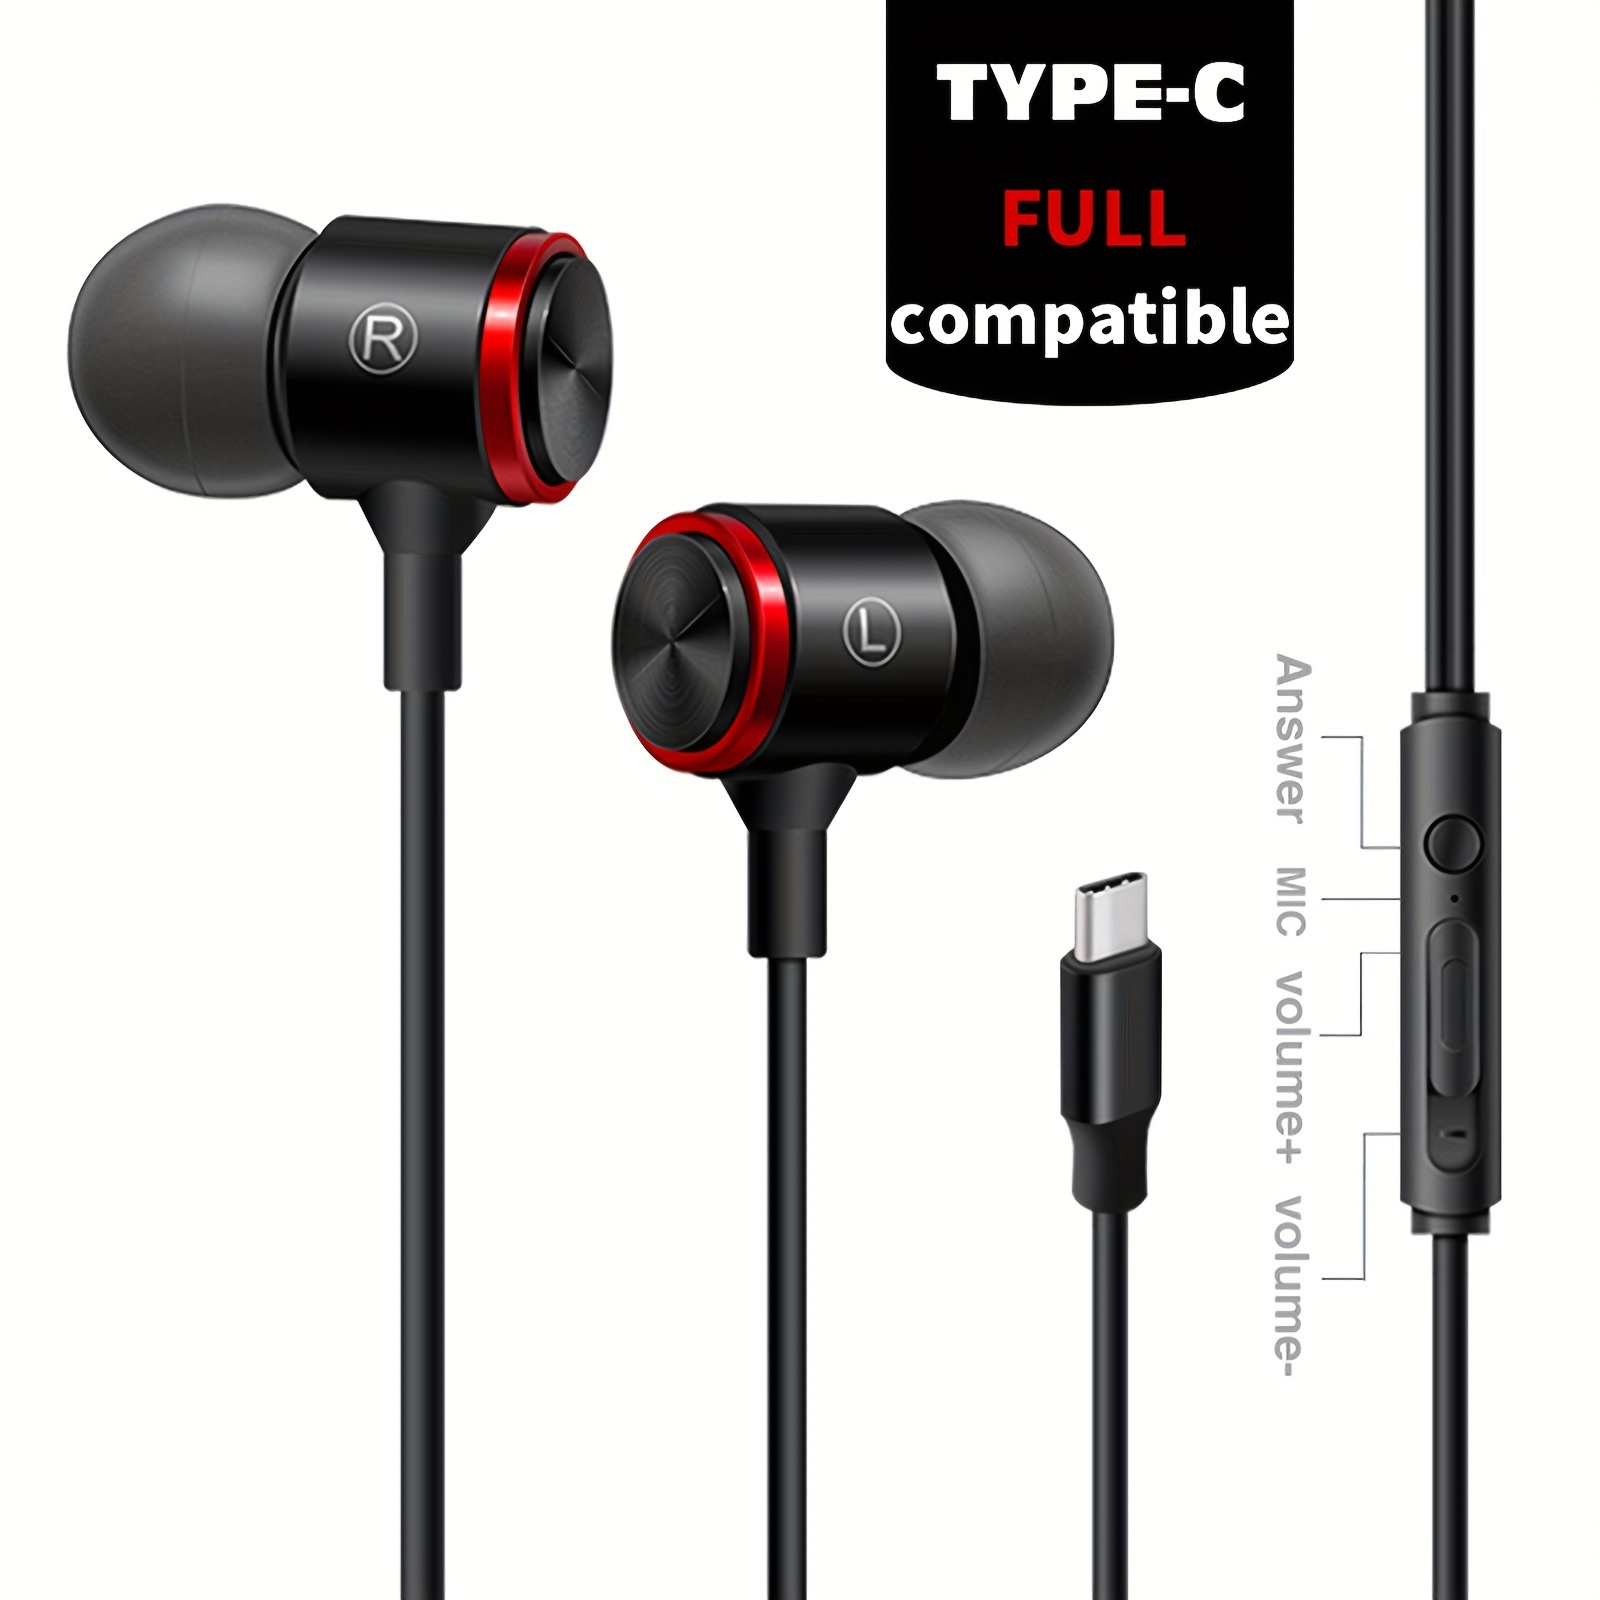 

Type C Earphones With Digital Chip, Metal In-ear Design, Heavy Bass, Wired Control, Suitable For Mobile Phone K Song And Gaming Earbuds.